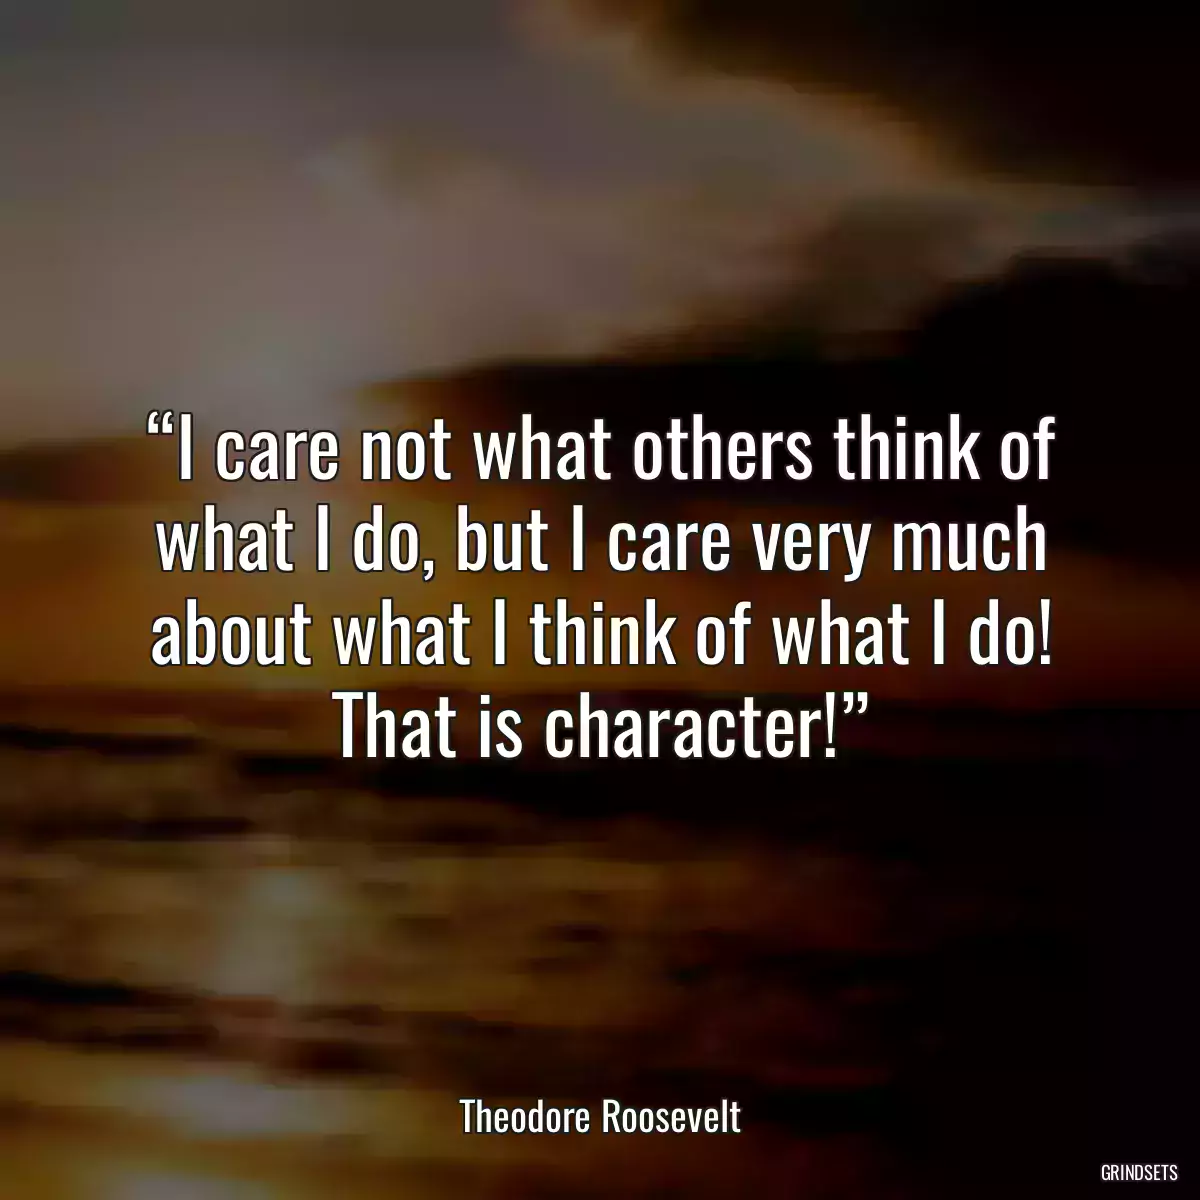 “I care not what others think of what I do, but I care very much about what I think of what I do! That is character!”